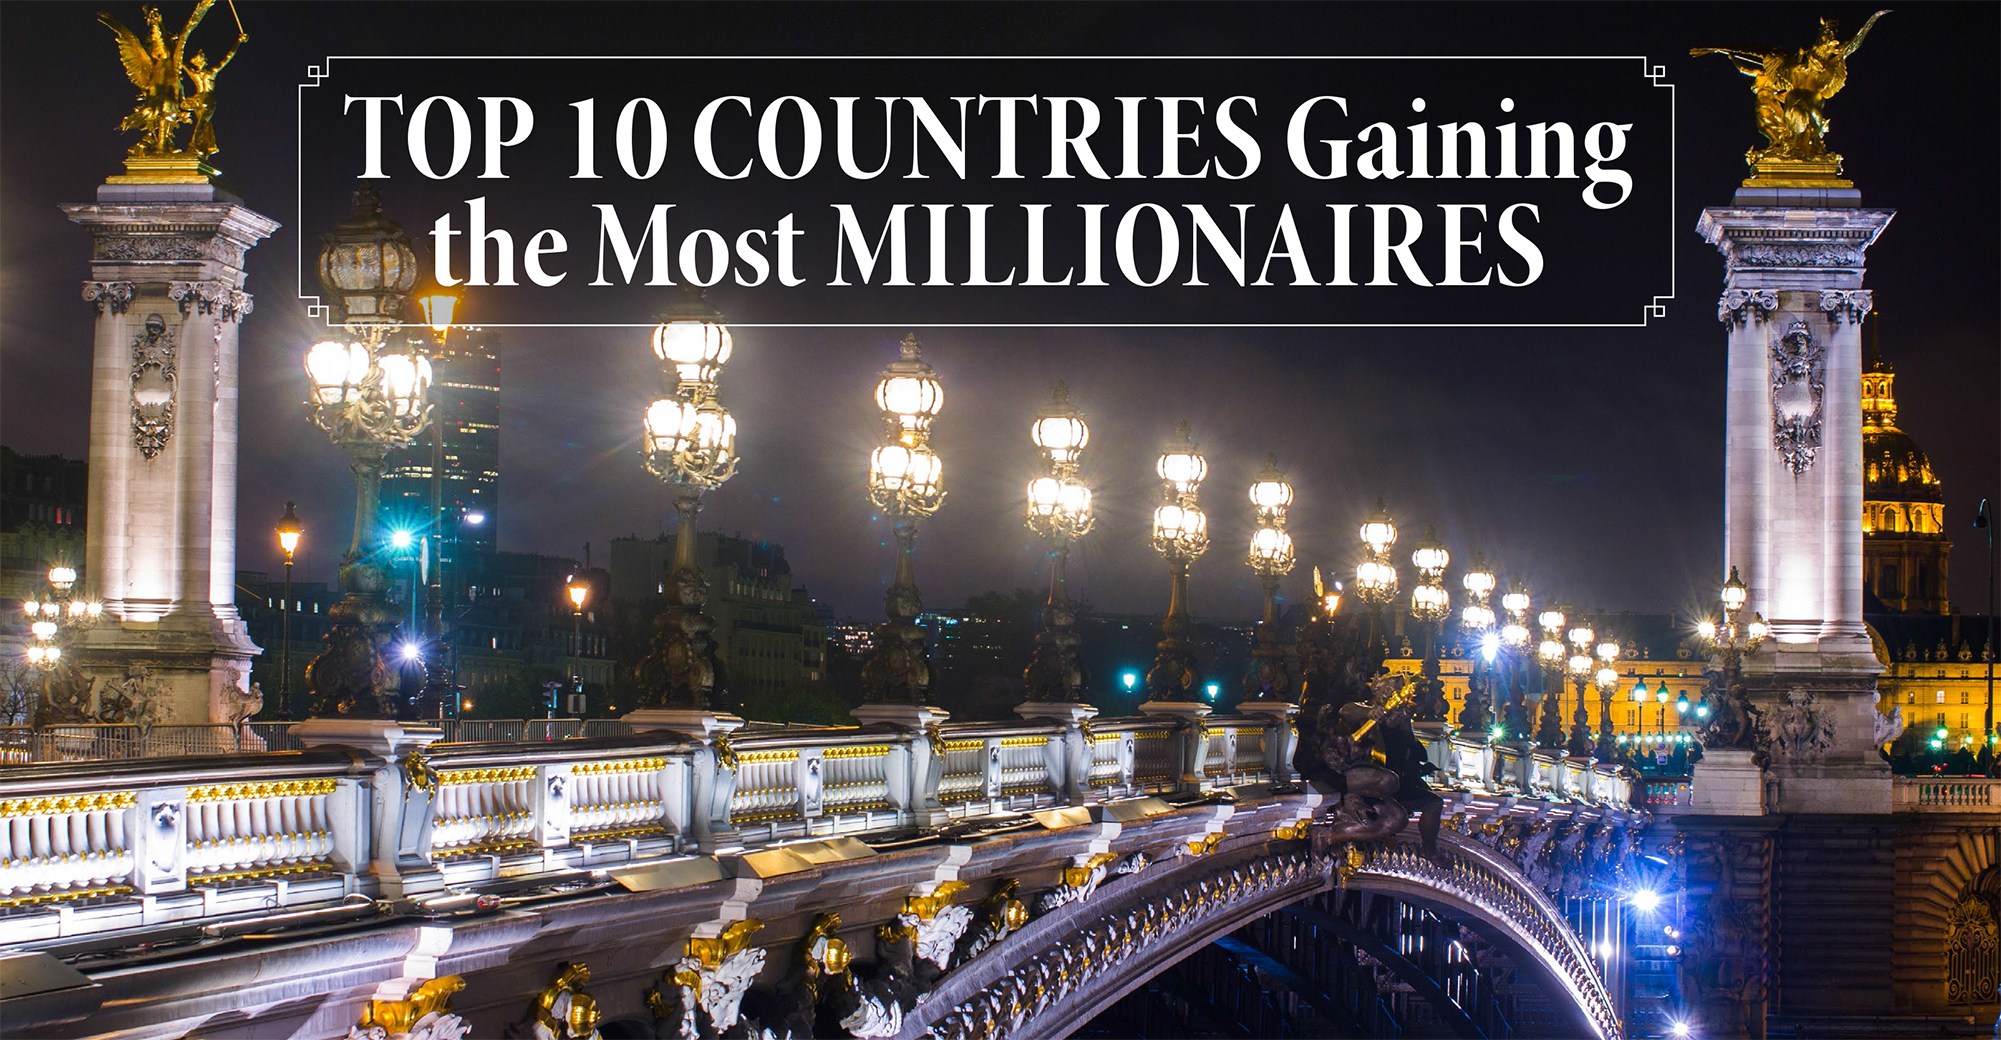 Top 10 Countries Gaining the Most Millionaires Wealth Management